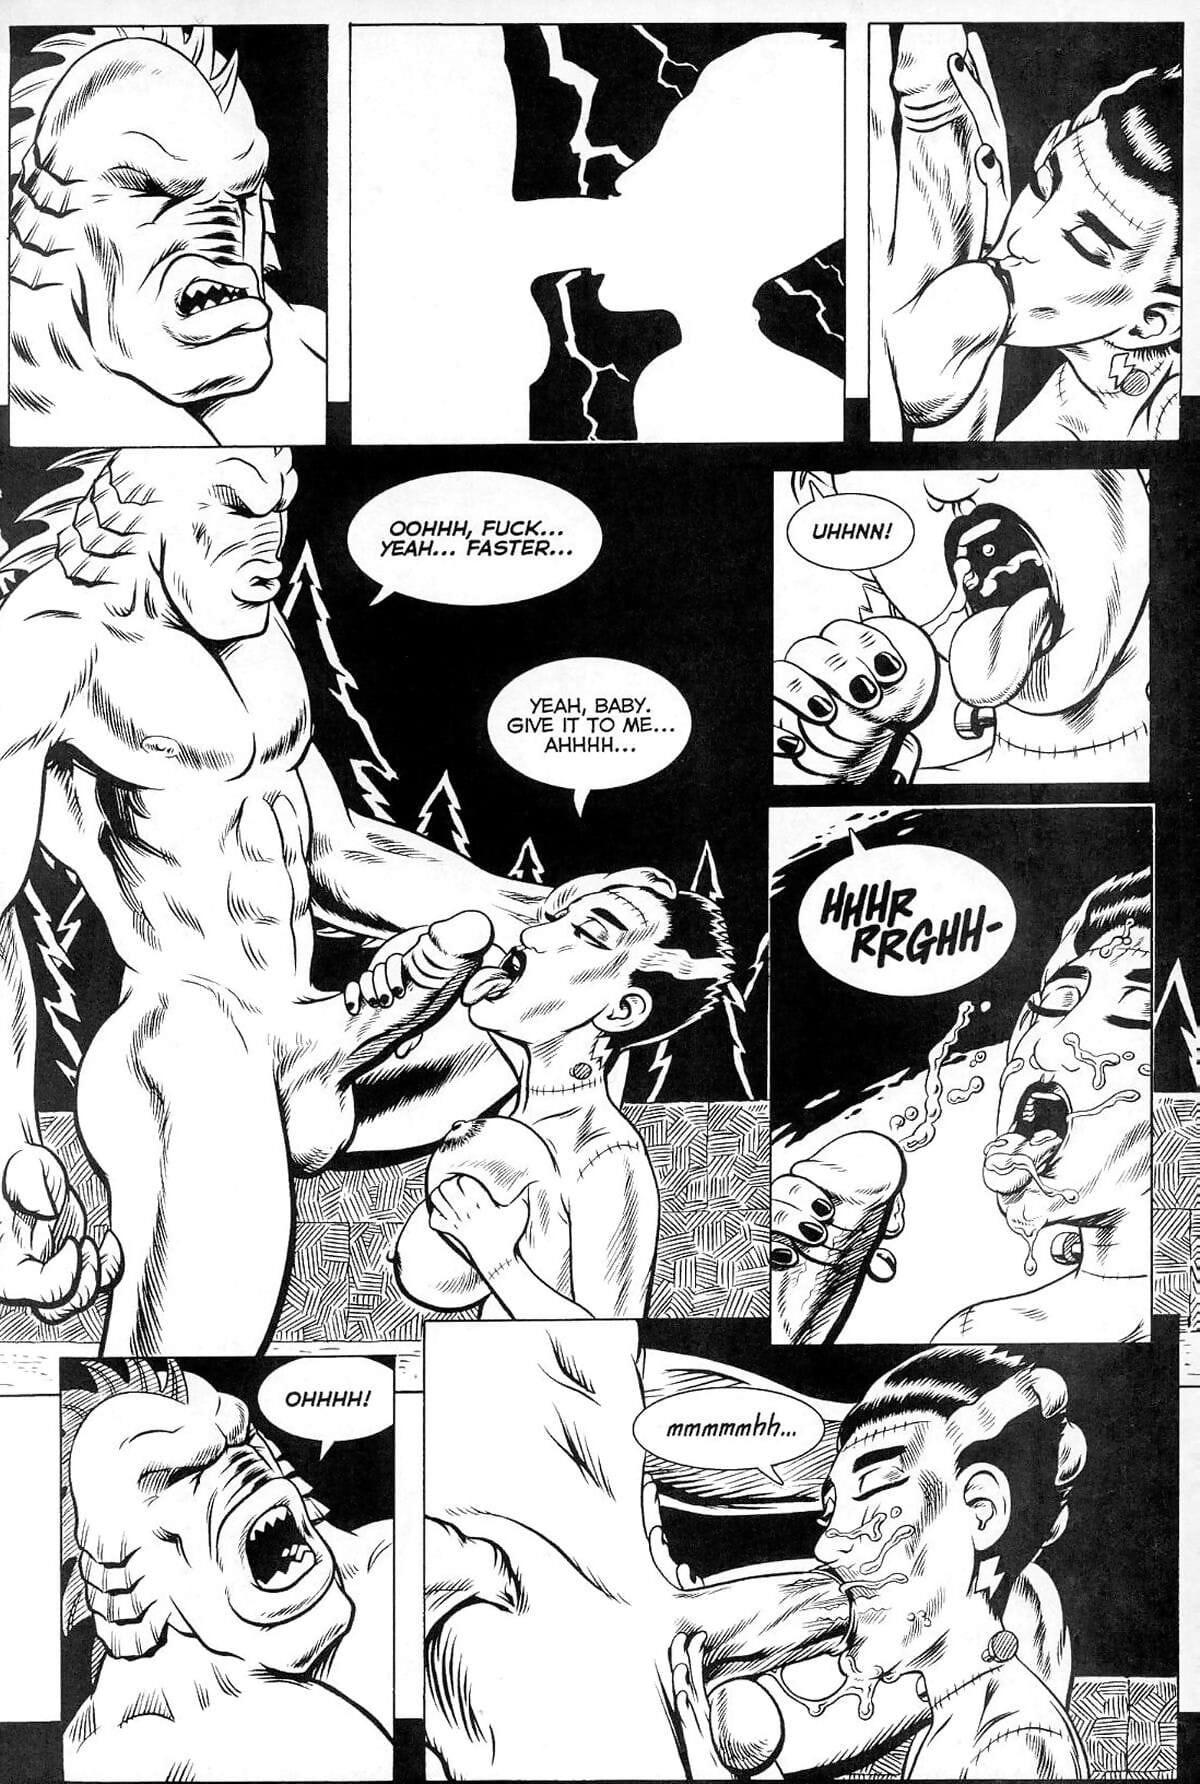 Horny Tails - part 2 page 1